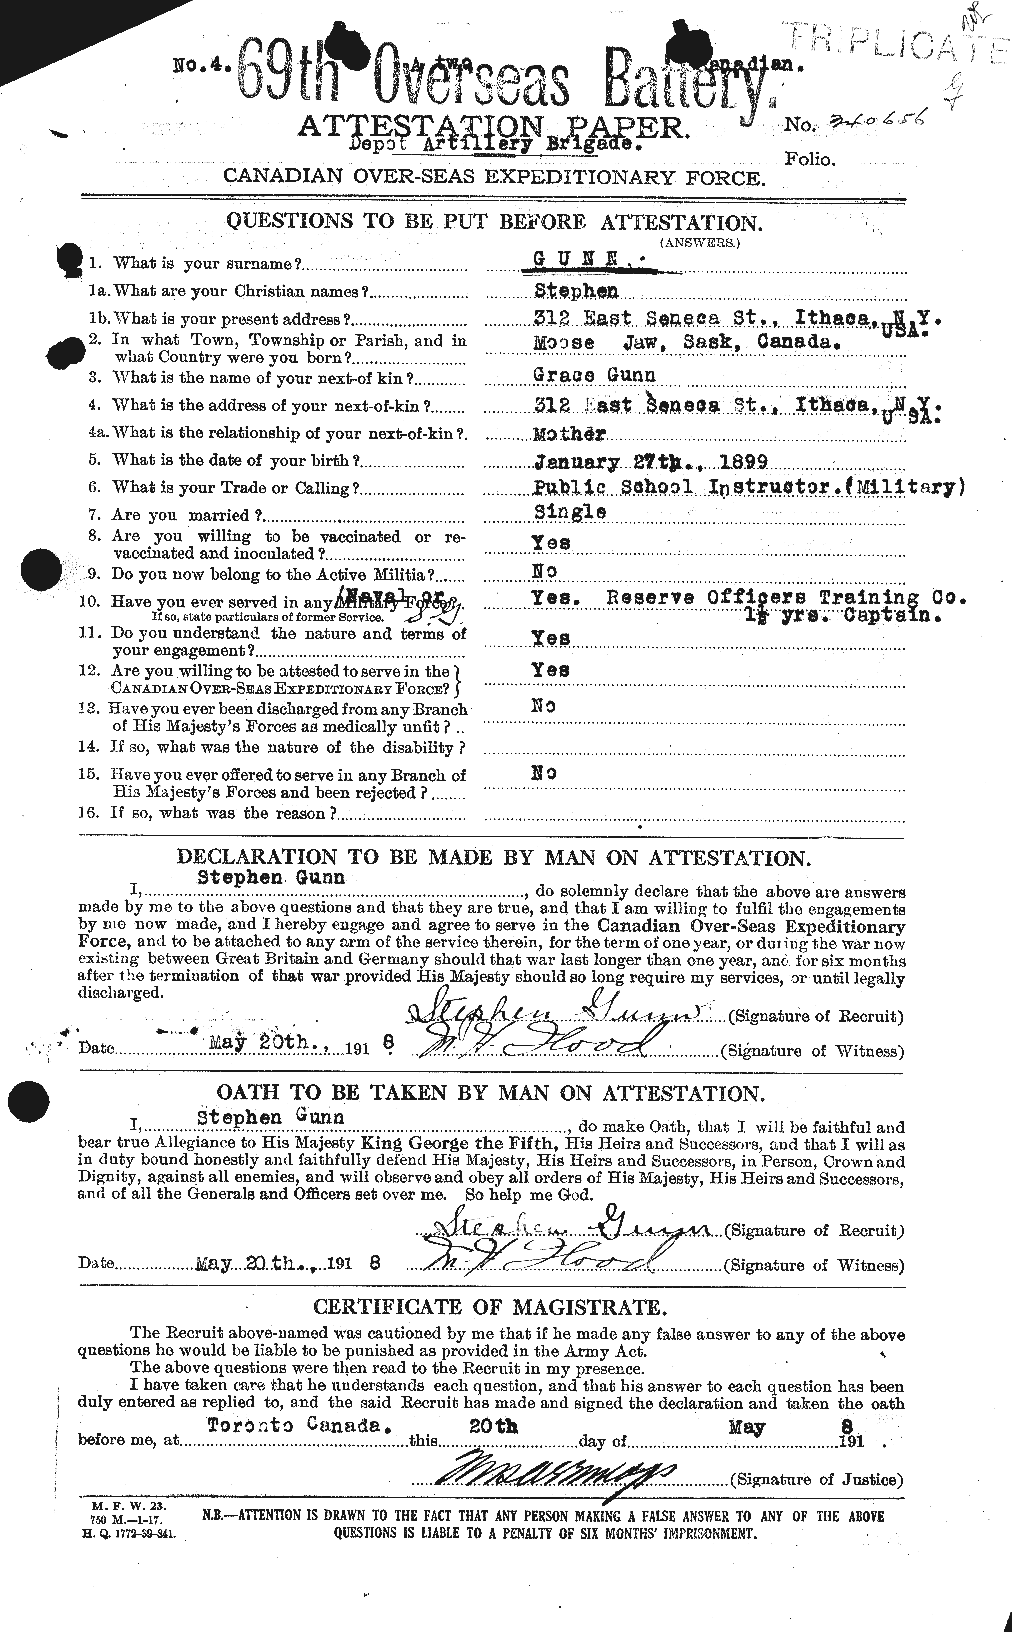 Personnel Records of the First World War - CEF 369335a